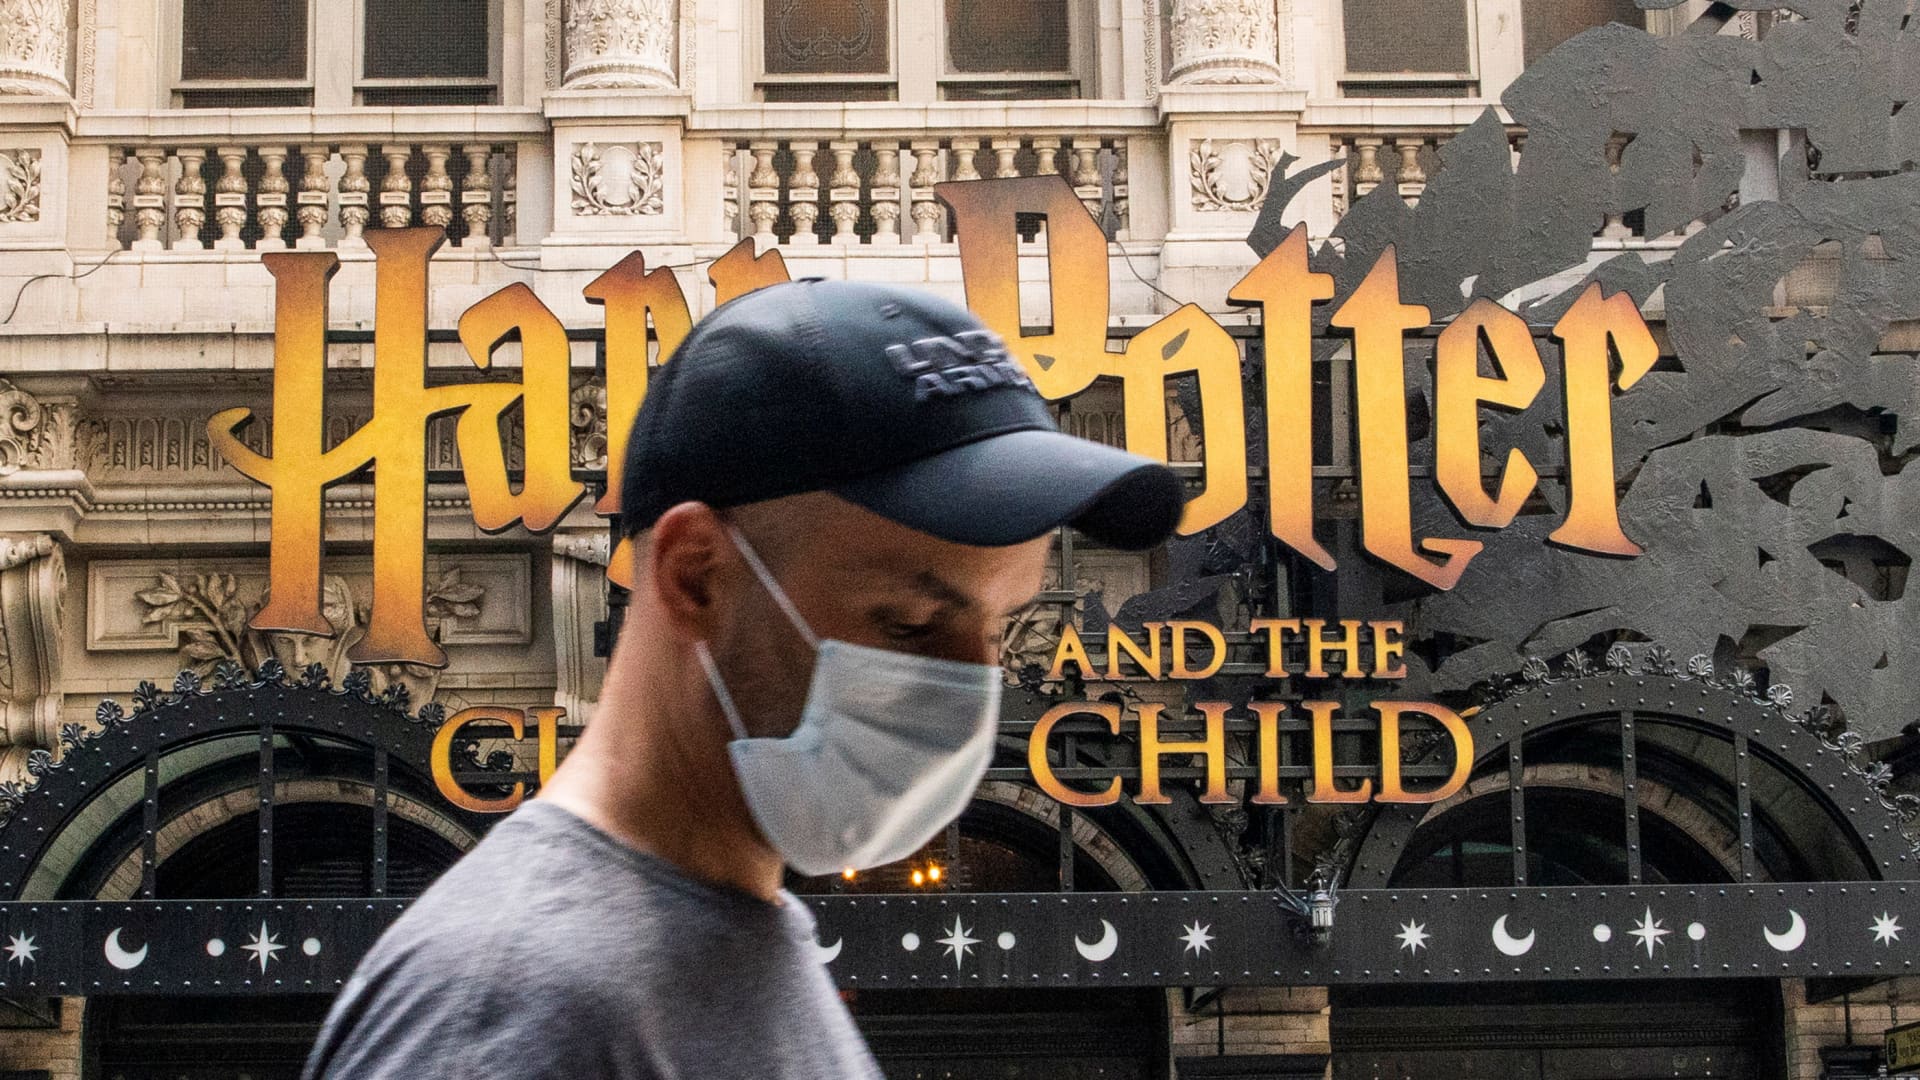 A man wears a mask to prevent against the spread of coronavirus disease (COVID-19) while he walks around Theater District in Times Square, as the highly transmissible Delta variant has led to a surge in infections, in New York City, U.S., July 30, 2021.